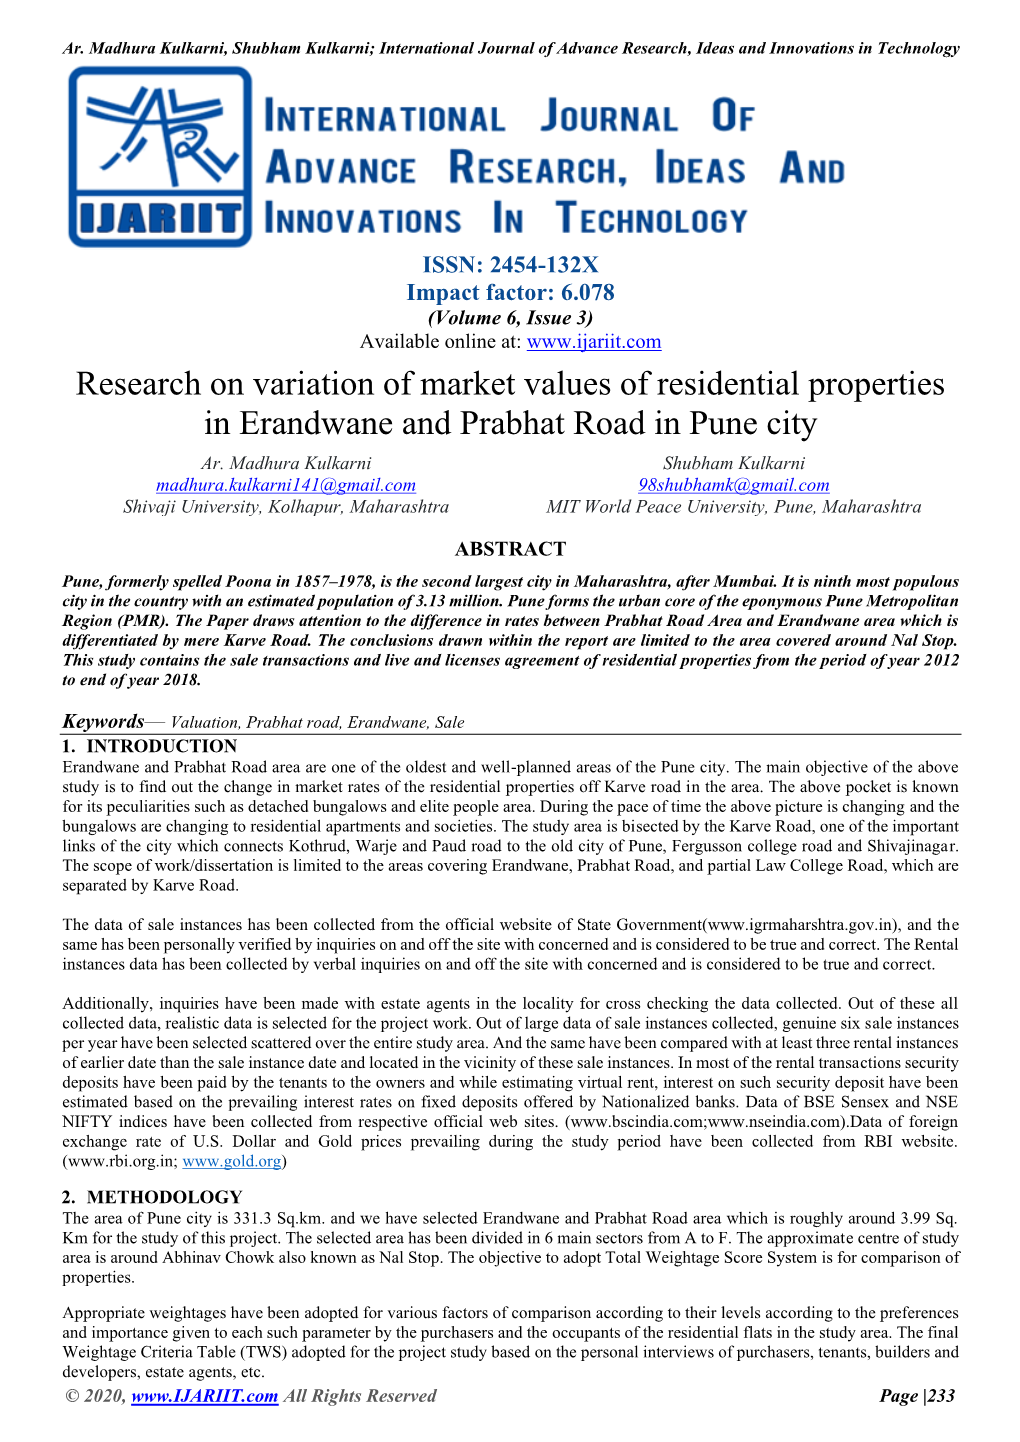 Research on Variation of Market Values of Residential Properties in Erandwane and Prabhat Road in Pune City Ar